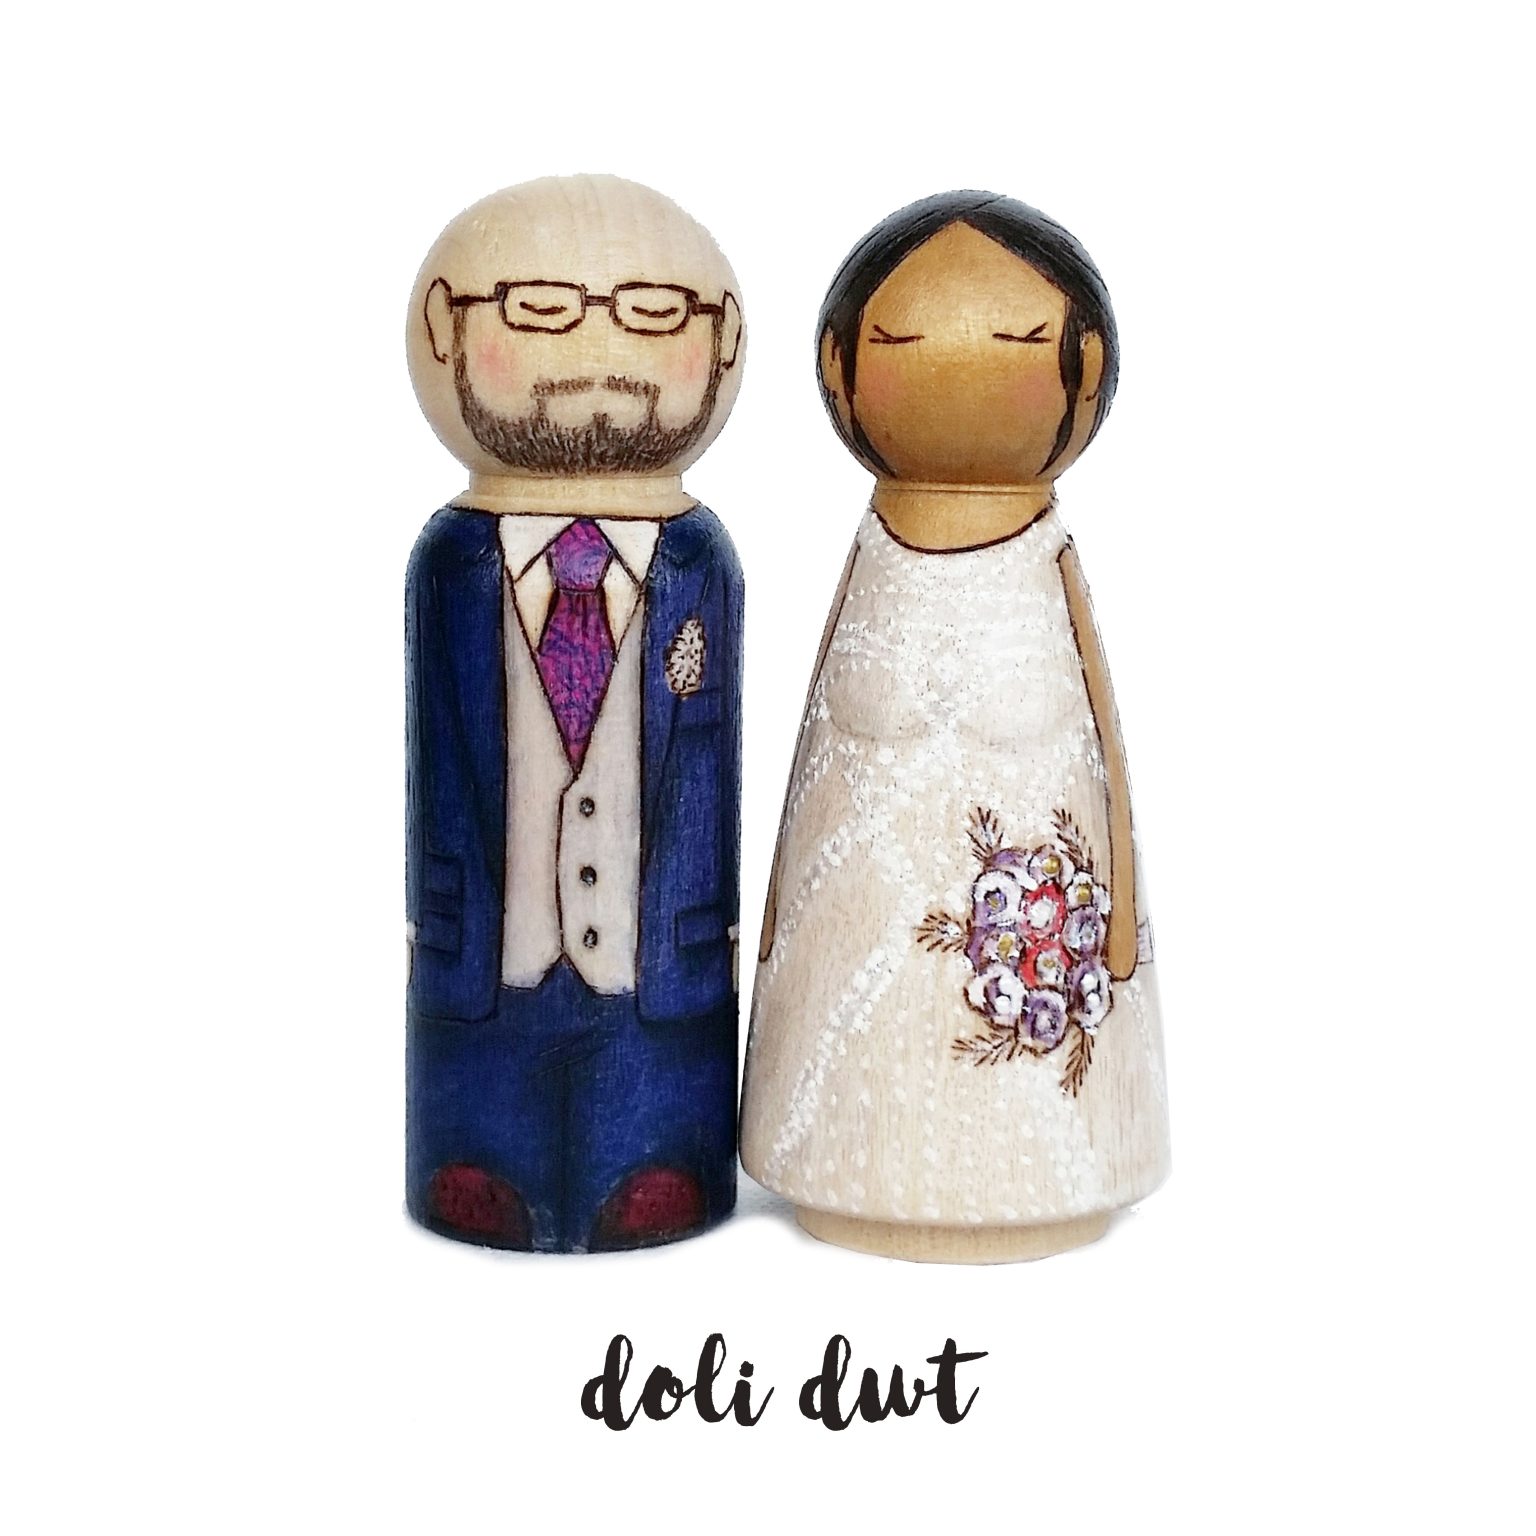 mr and mrs cake toppers, wedding cake ideas, wedding cake figurines, ersonalised wedding cake topper